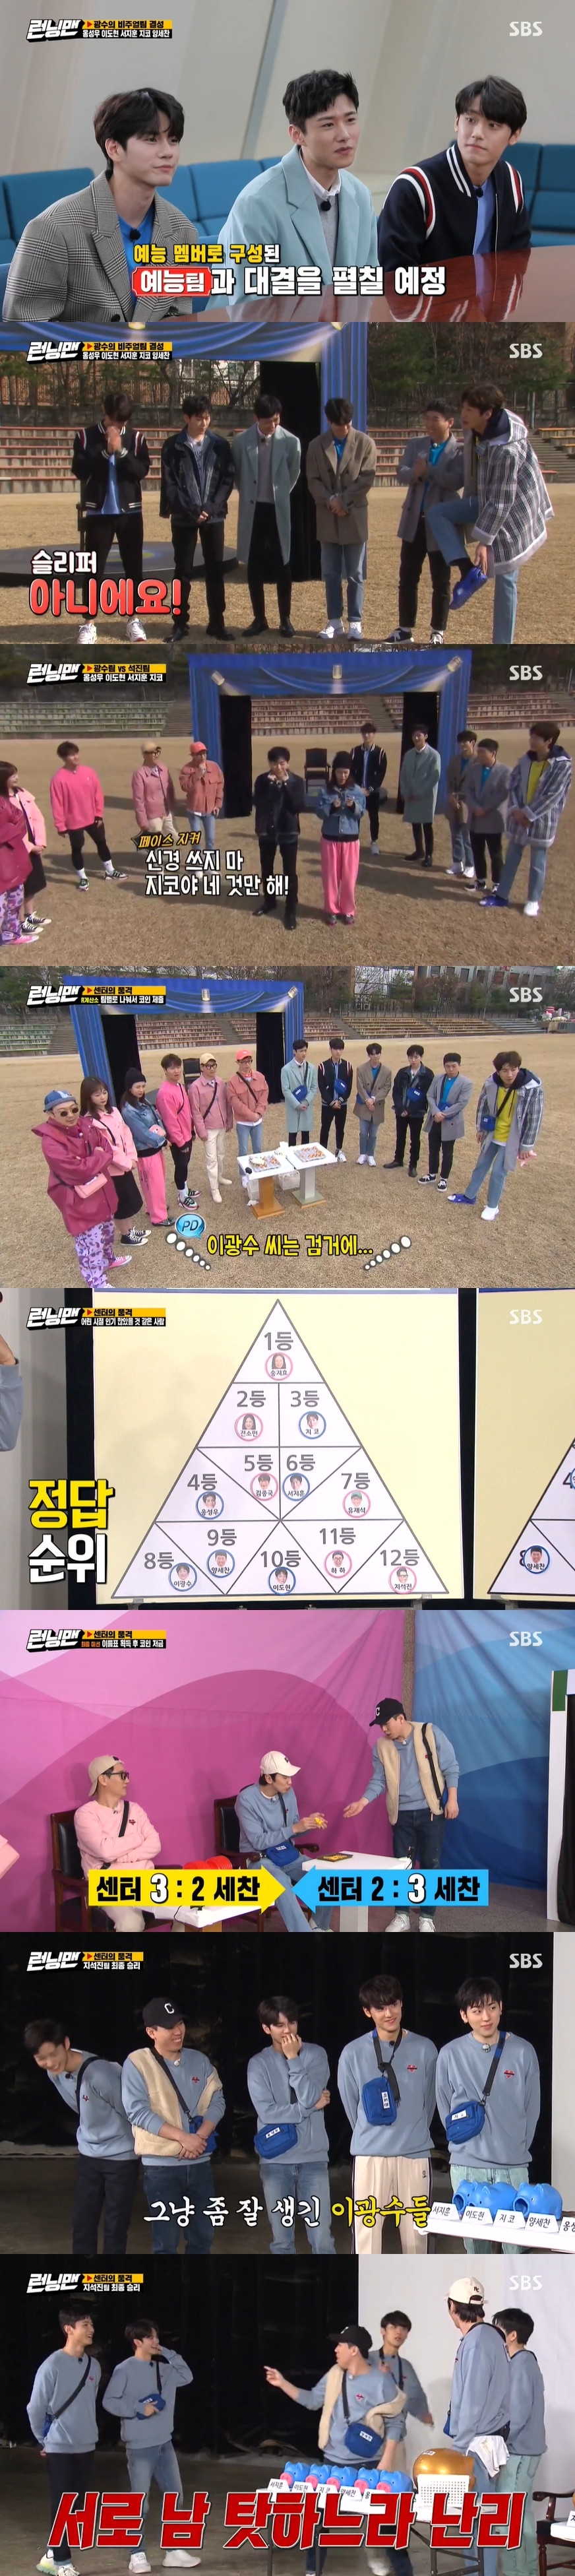 Seoul) = Lee Kwang-soo, a group of visual centers, betrayed the betrayal and eventually lost.SBS Running Man, which was broadcasted at 5 pm on the 29th, was featured as a special feature of Centers Dignity and appeared as a guest by Seo Ji-hoon, Seo Ji-hoon,On this day, Lee Kwang-soos visual team was packed with Ong Sung-woo Lee Do-hyun Seo Ji-hoon Zico Yang Se-chan, and the rest of the Running Man members were organized as Ji Suk-jins entertainment team.First, the visual team played the egg-covered Game, and the Ji Suk-jin team, which broke the egg the most, was defeated.After that, I had to submit COINs by team, but Lee Kwang-soo confirmed that the number of COINs originally decided to bet was less than 15, and pointed out Yang Se-chan as a traitor, but failed and gave COINs.Ji Suk-jins team was also shocked to confirm that only six of the 20 submissions were collected.Ji Suk-jin pointed out Yoo Jae-Suk as a traitor, but failed to arrest him, and Song Ji-hyo did not submit COIN.We conducted a mission to meet the ranking of surveys for 20s and 60s.Lee Do-hyun said, I was surprised to hear that chocolate was piled on my desk on Valentines Day at elementary school, and Seo Ji-hoon said, I was standing in line to see me.Lee Kwang-soo, who predicted a lot, won the first place with Song Ji-hyo and Ji Suk-jin in the overall ranking. Lee Kwang-soo won the clubs worst-playing team.Lee Kwang-soo pointed out Lee Do-hyun as a traitor, and Lee Do-hyun succeeded in arresting and submitted all the lack of COINs.Ji Suk-jin pointed to Haha as a traitor, and Haha was arrested and submitted all the lack of COINs.The final mission was to be held in a piggy bank, to open or find a name tag, and Zico rushed to see Yoo Jae-Suk and to open the name tag, but Kim Jong-guk was caught by the next person and eventually torn the name tag.Ong Sung-woo met Haha and asked to tear off the name tags with each other, and Haha was absurd because he did not open it.However, each of them put it in his own piggy bank and betrayed Lee Kwang-soo.In the end, Lee Kwang-soo won the final victory with 56 and Ji Suk-jin with 70, followed by Jeon So-min with the final first place, and Lee Do-hyun and Zico with penalties to beat his forehead.However, Jeon So-min acquired the name tag for the sign of the member.Meanwhile, Running Man is broadcast every Sunday at 5 pm.